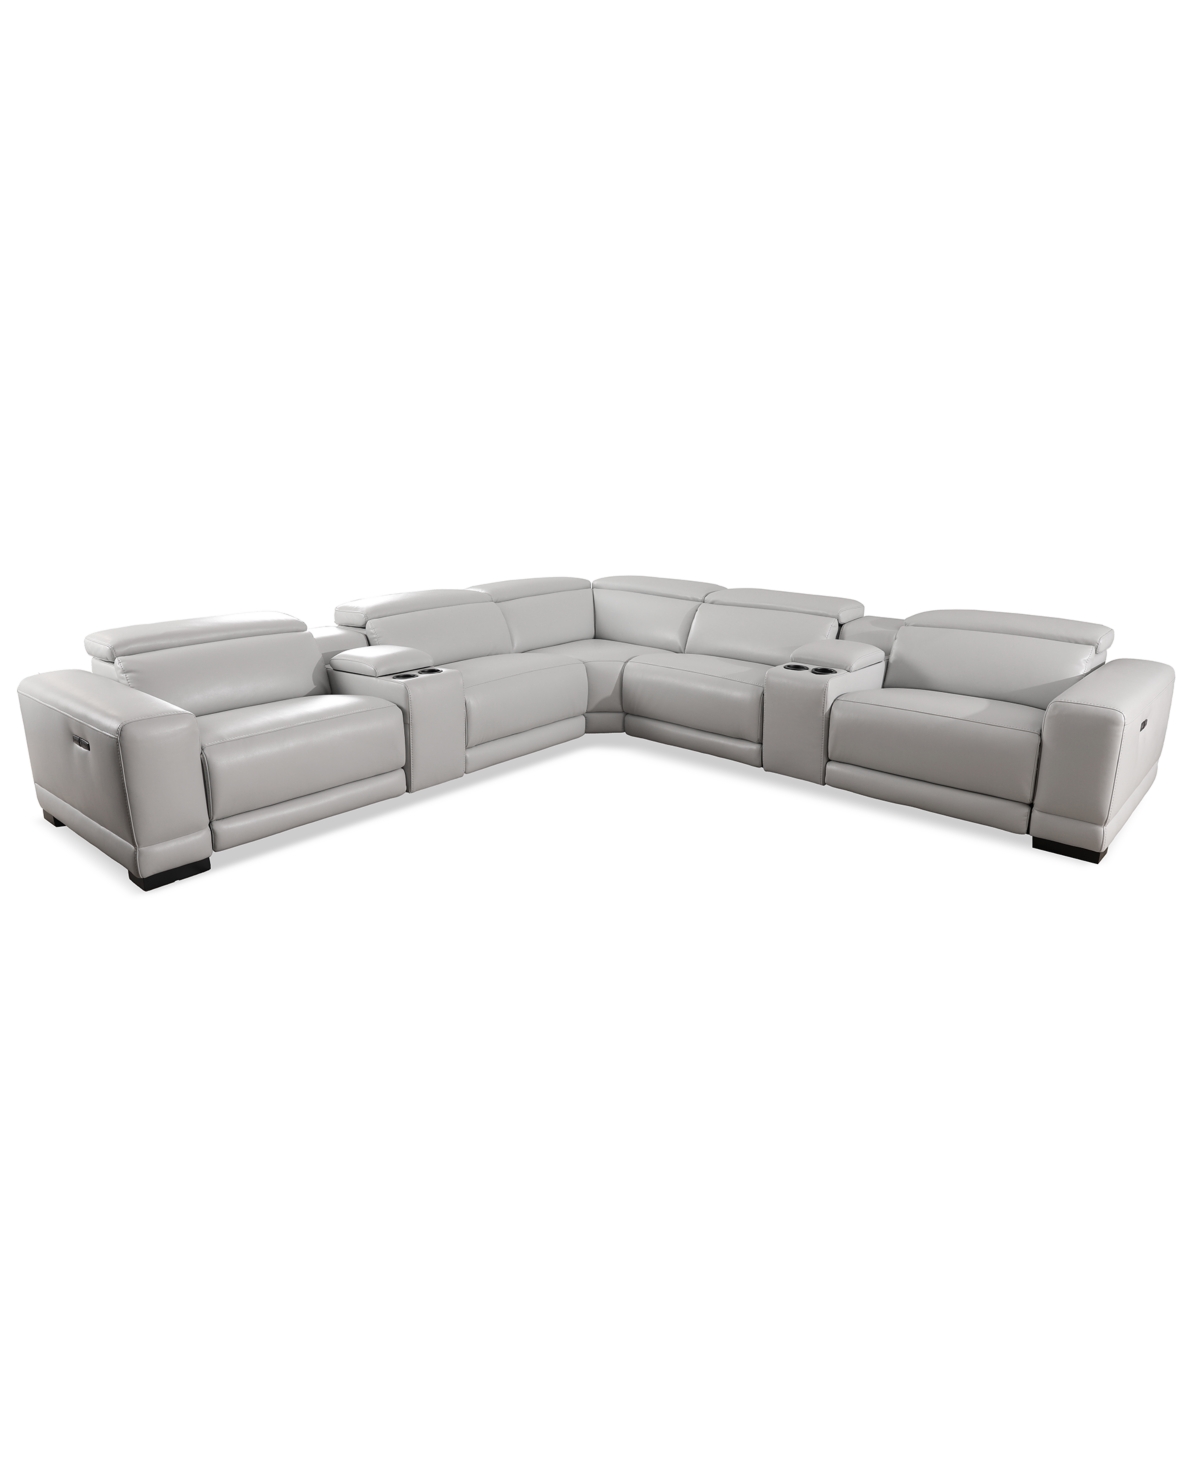 Furniture Krofton 7-pc. Beyond Leather Fabric Sectional With 3 Power Motion Recliners And 2 Consoles, Created In Fog